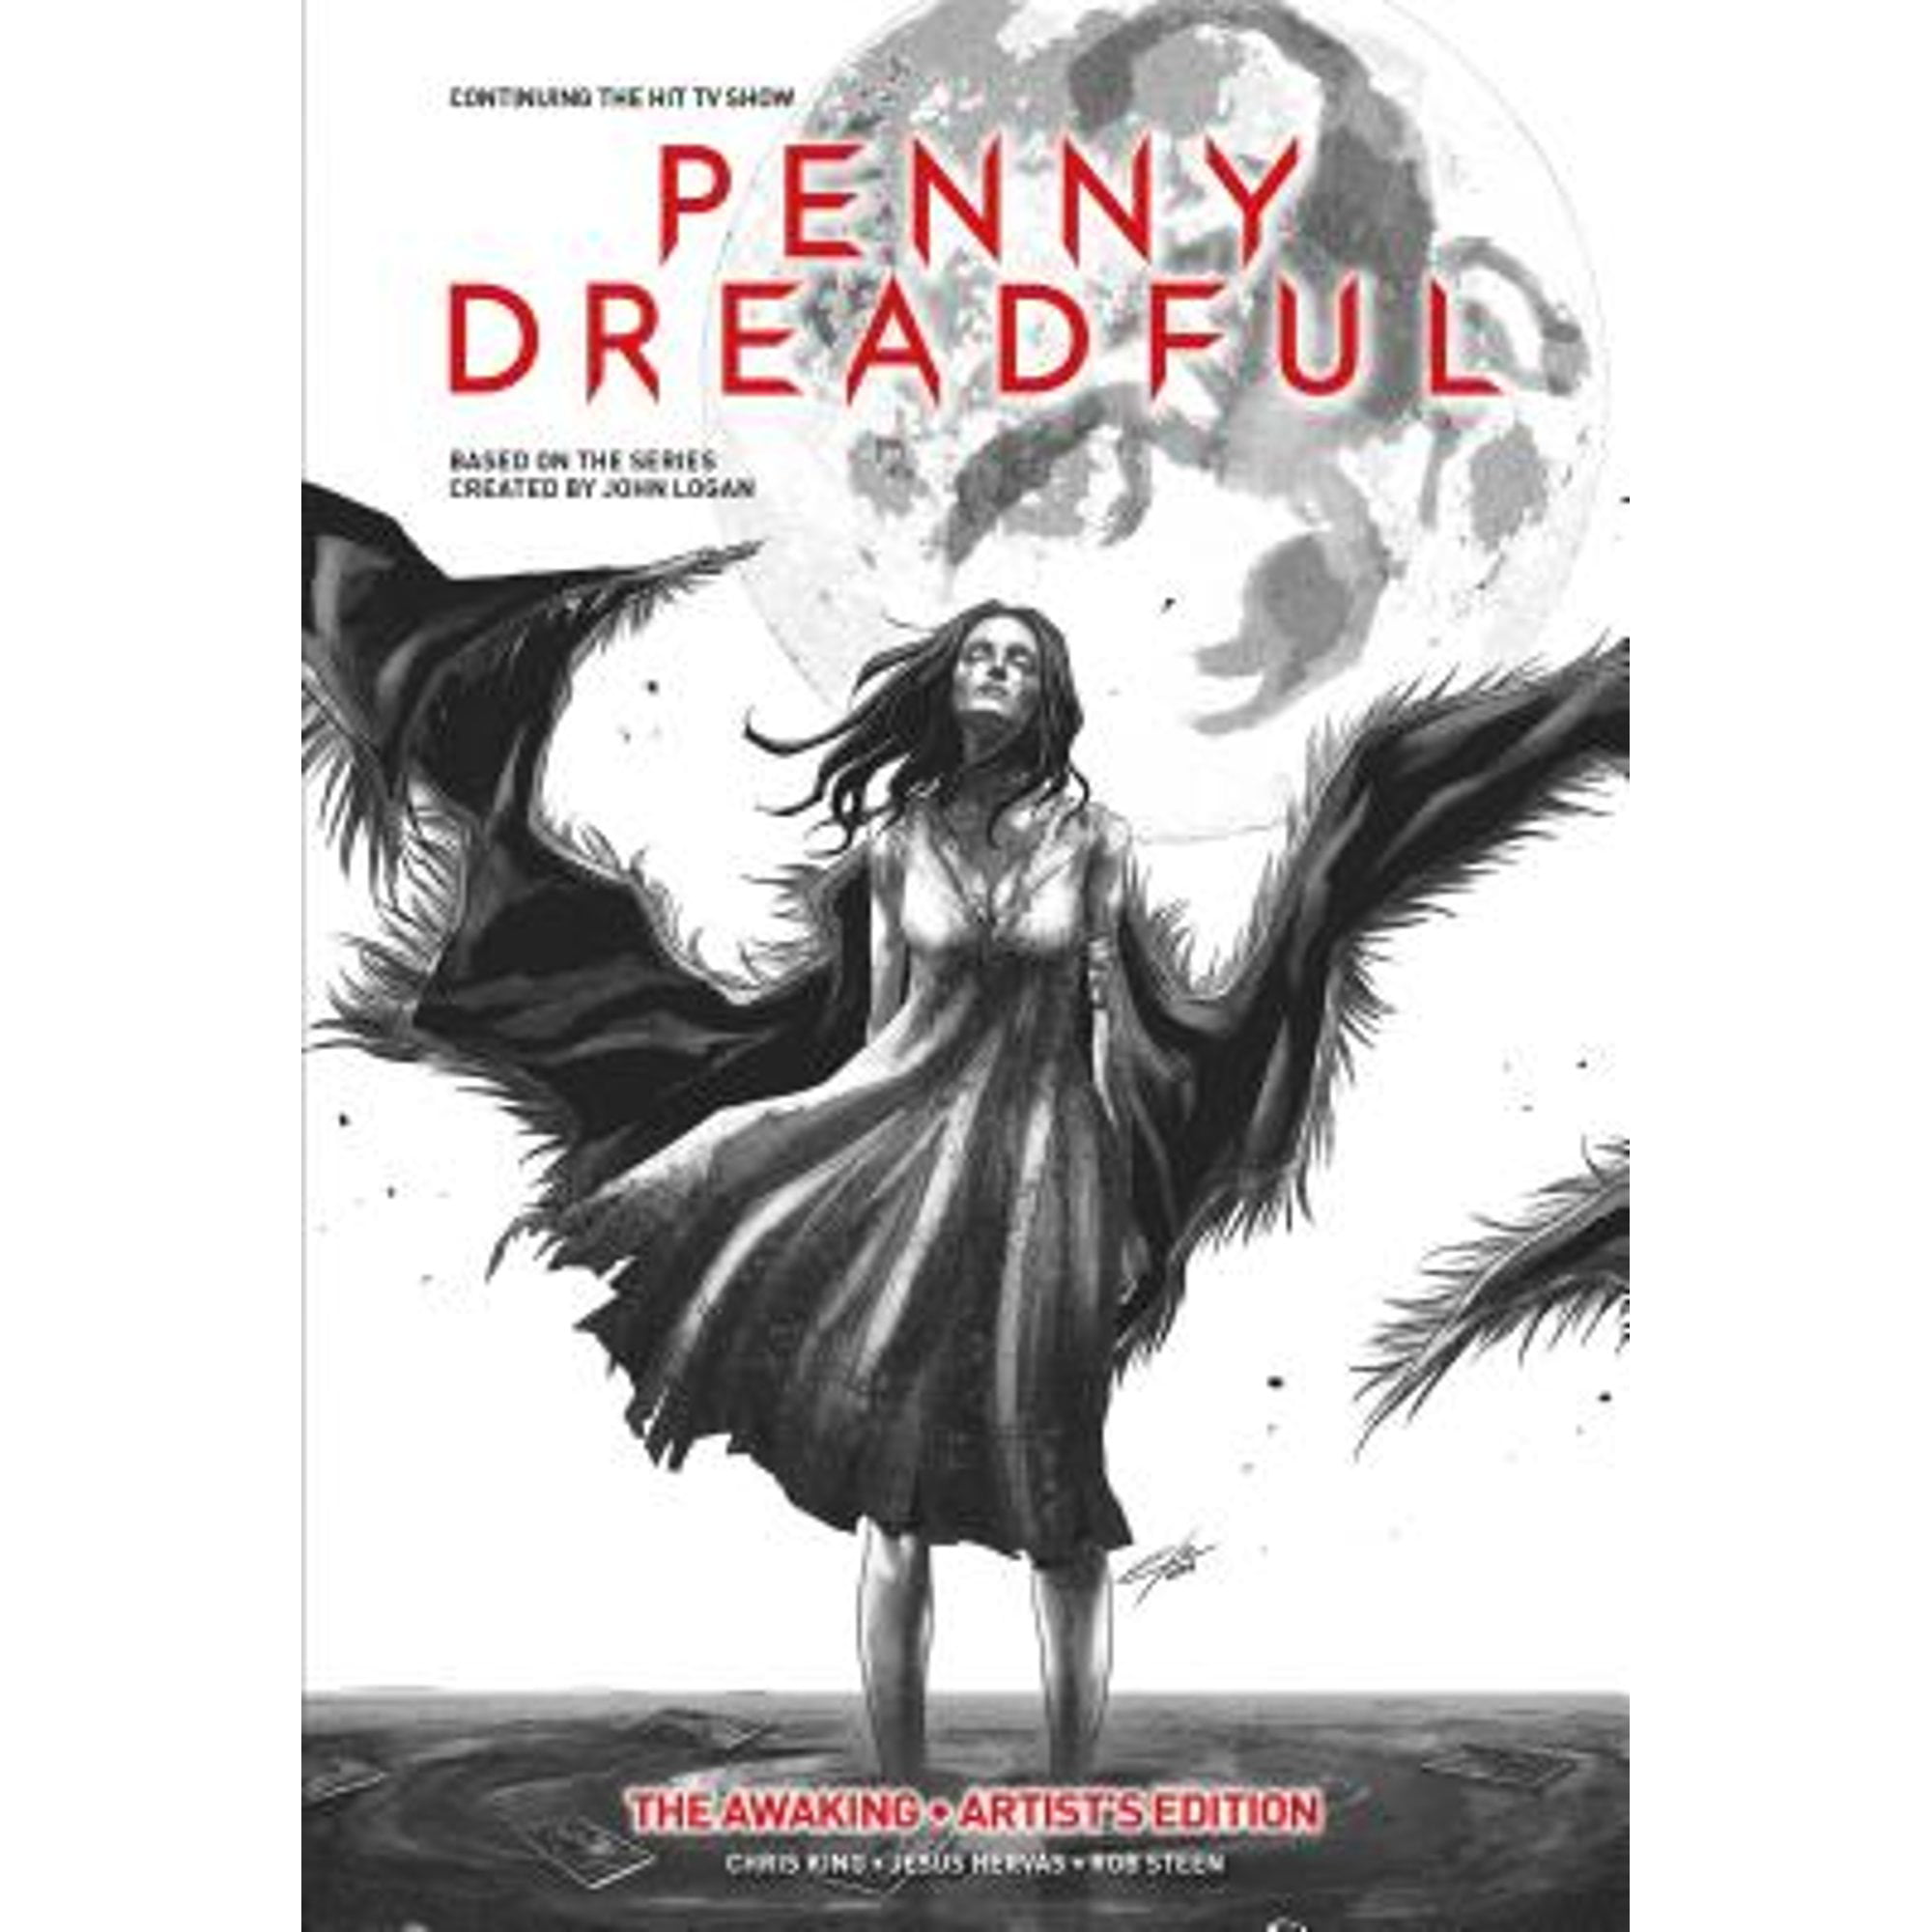 Pre-Owned Penny Dreadful Vol. 1: The Awaking Artist's Edition (Hardcover 9781785868771) by Chris King